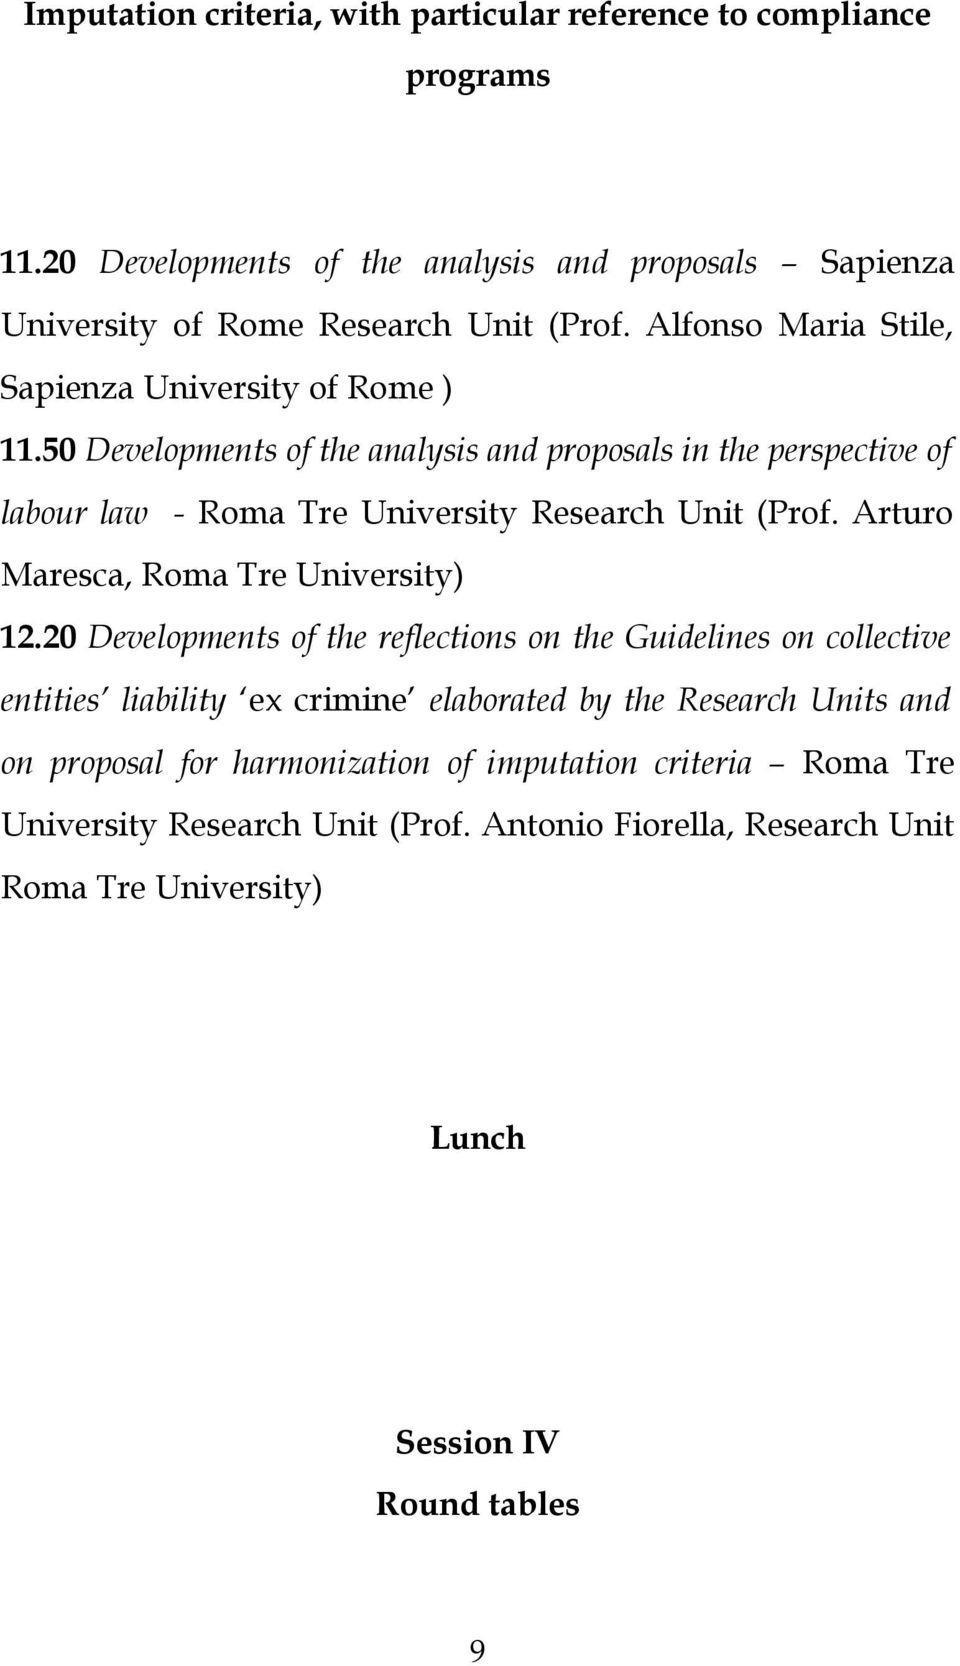 50 Developments of the analysis and proposals in the perspective of labour law - Roma Tre University Research Unit (Prof. Arturo Maresca, Roma Tre University) 12.